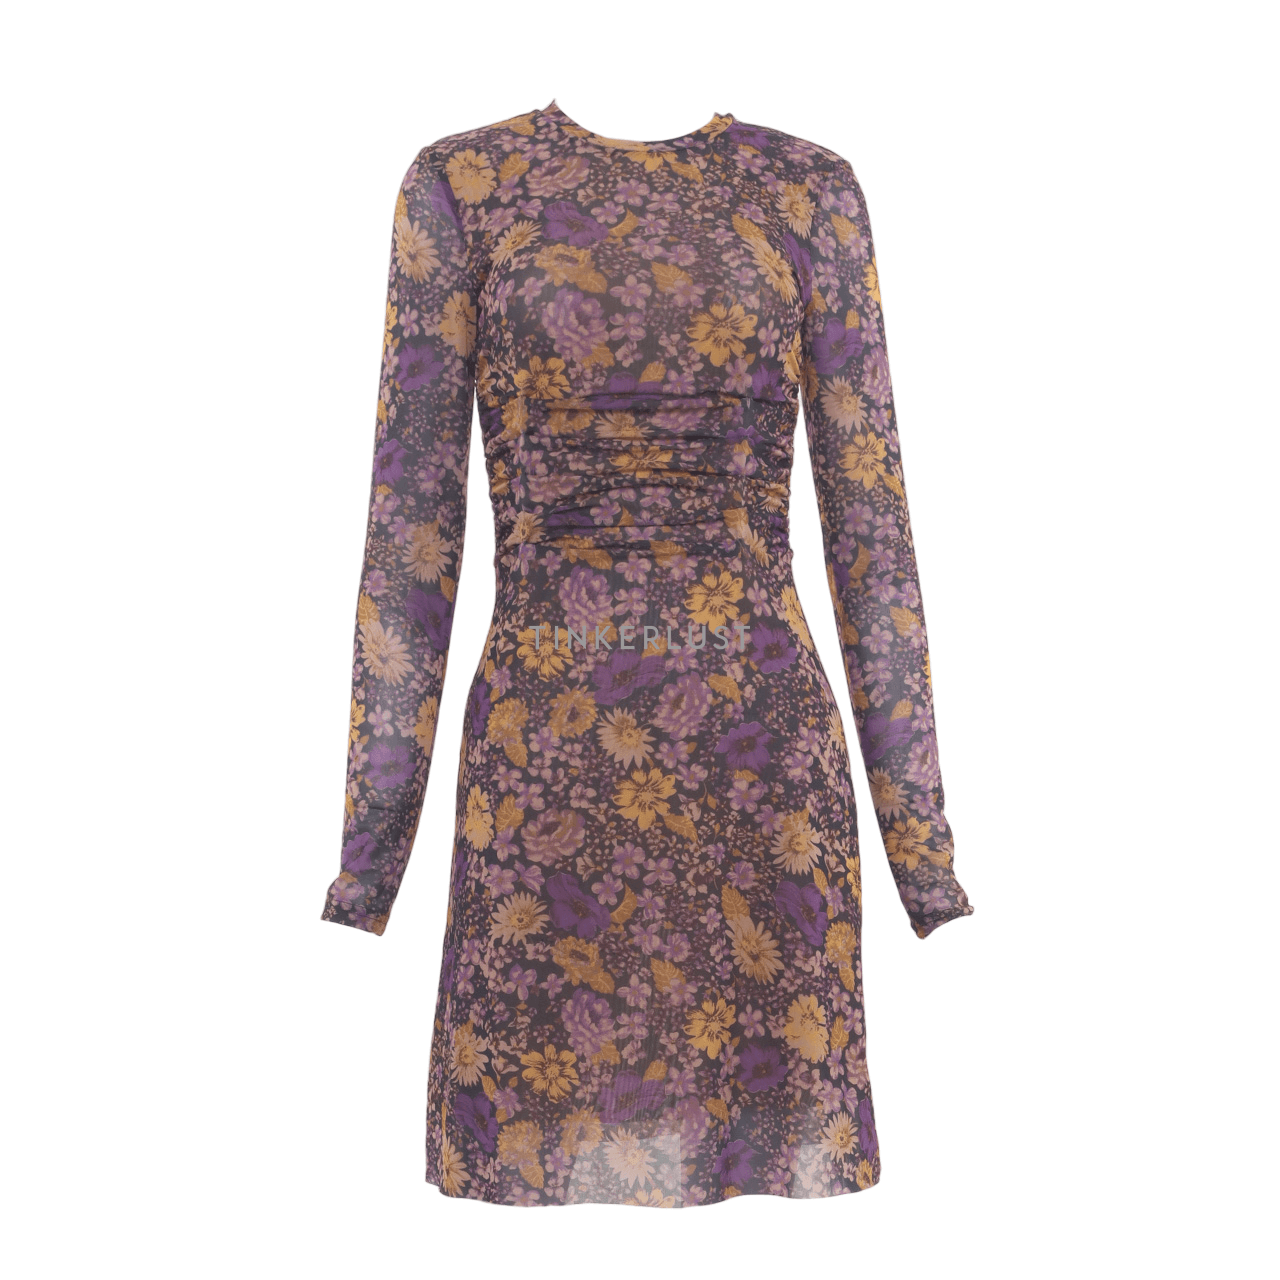 & Other Stories Multi Floral Mini Dress